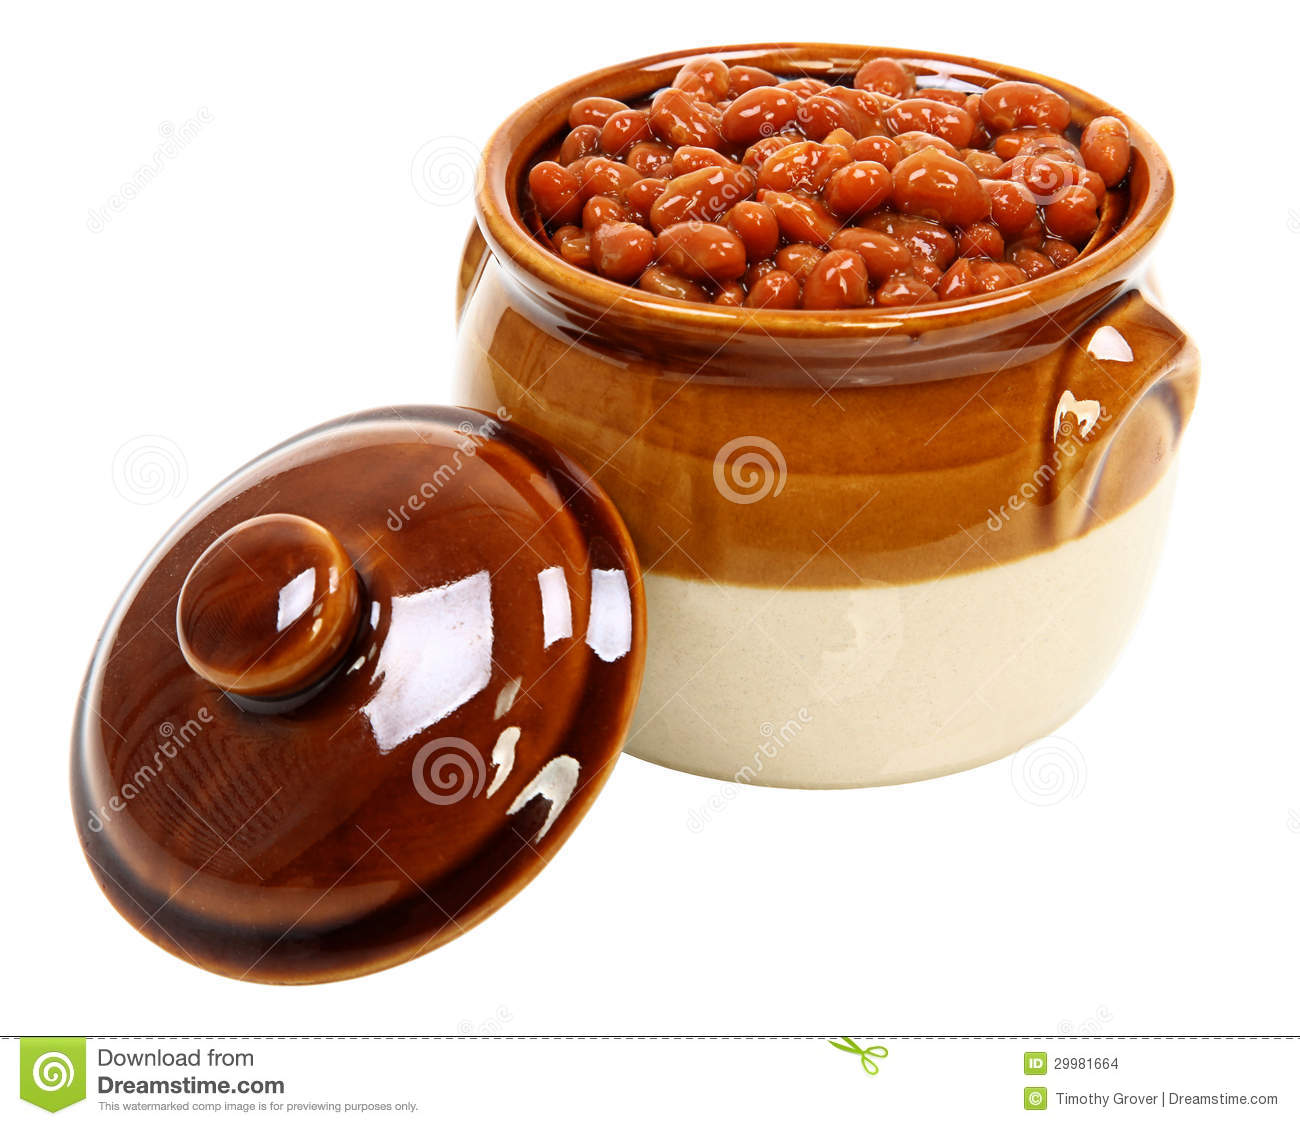 Baked Beans Illustrations And Clipart   Bed Mattress Sale